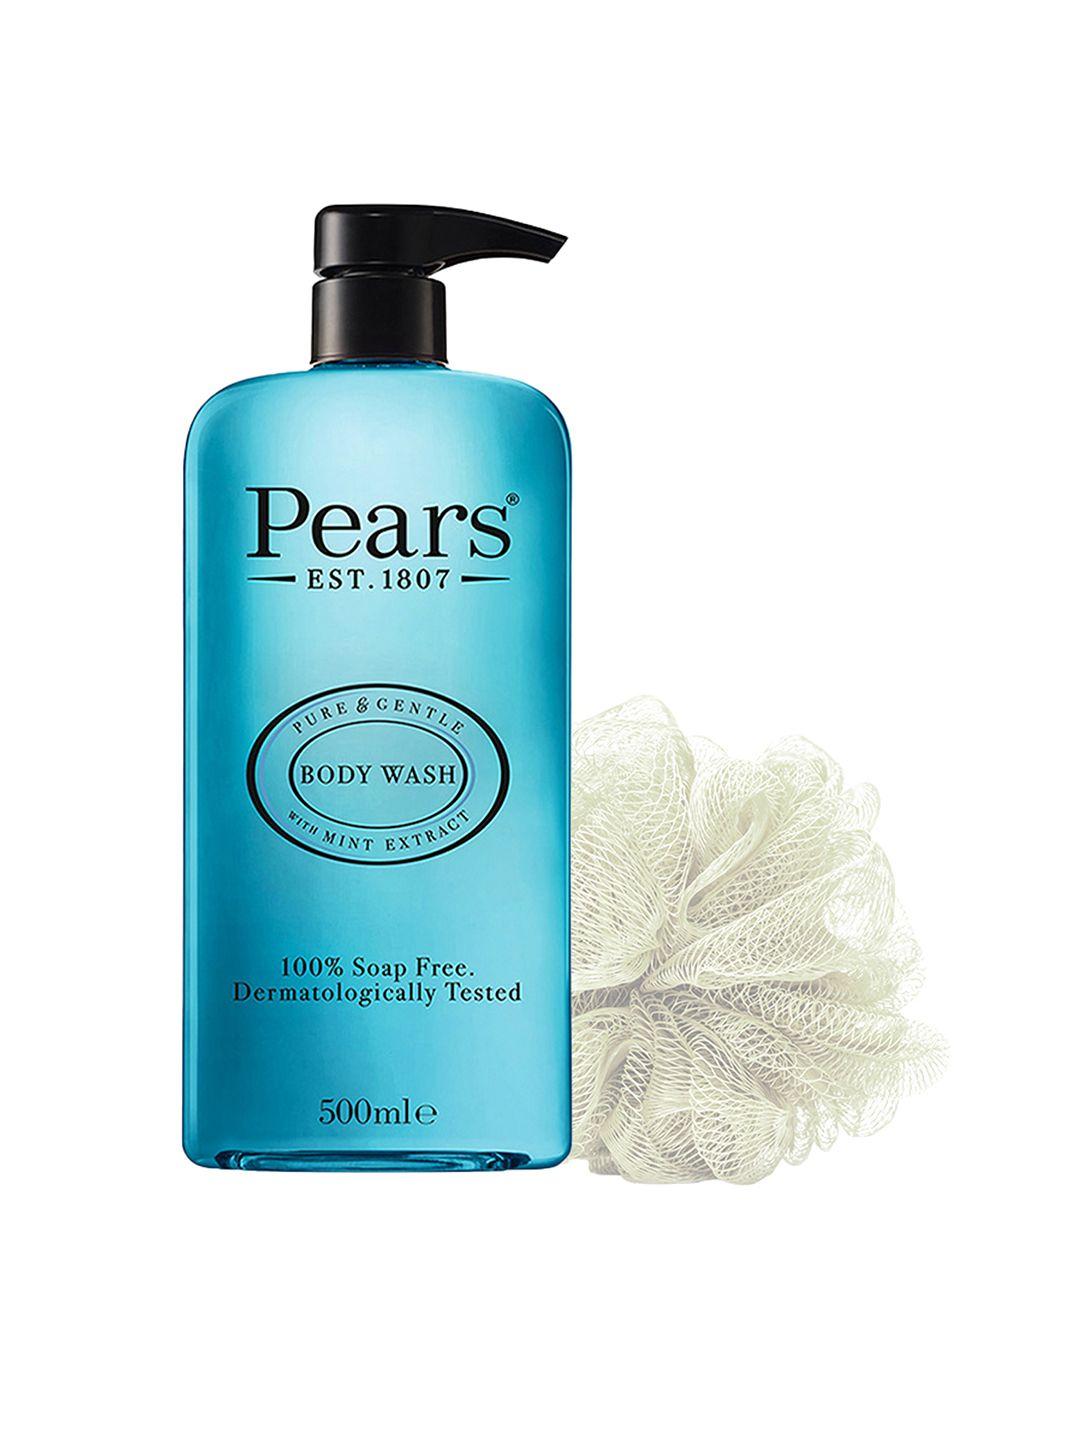 pears pure & gentle 100% soap free mint extracts body wash with loofah 500 ml